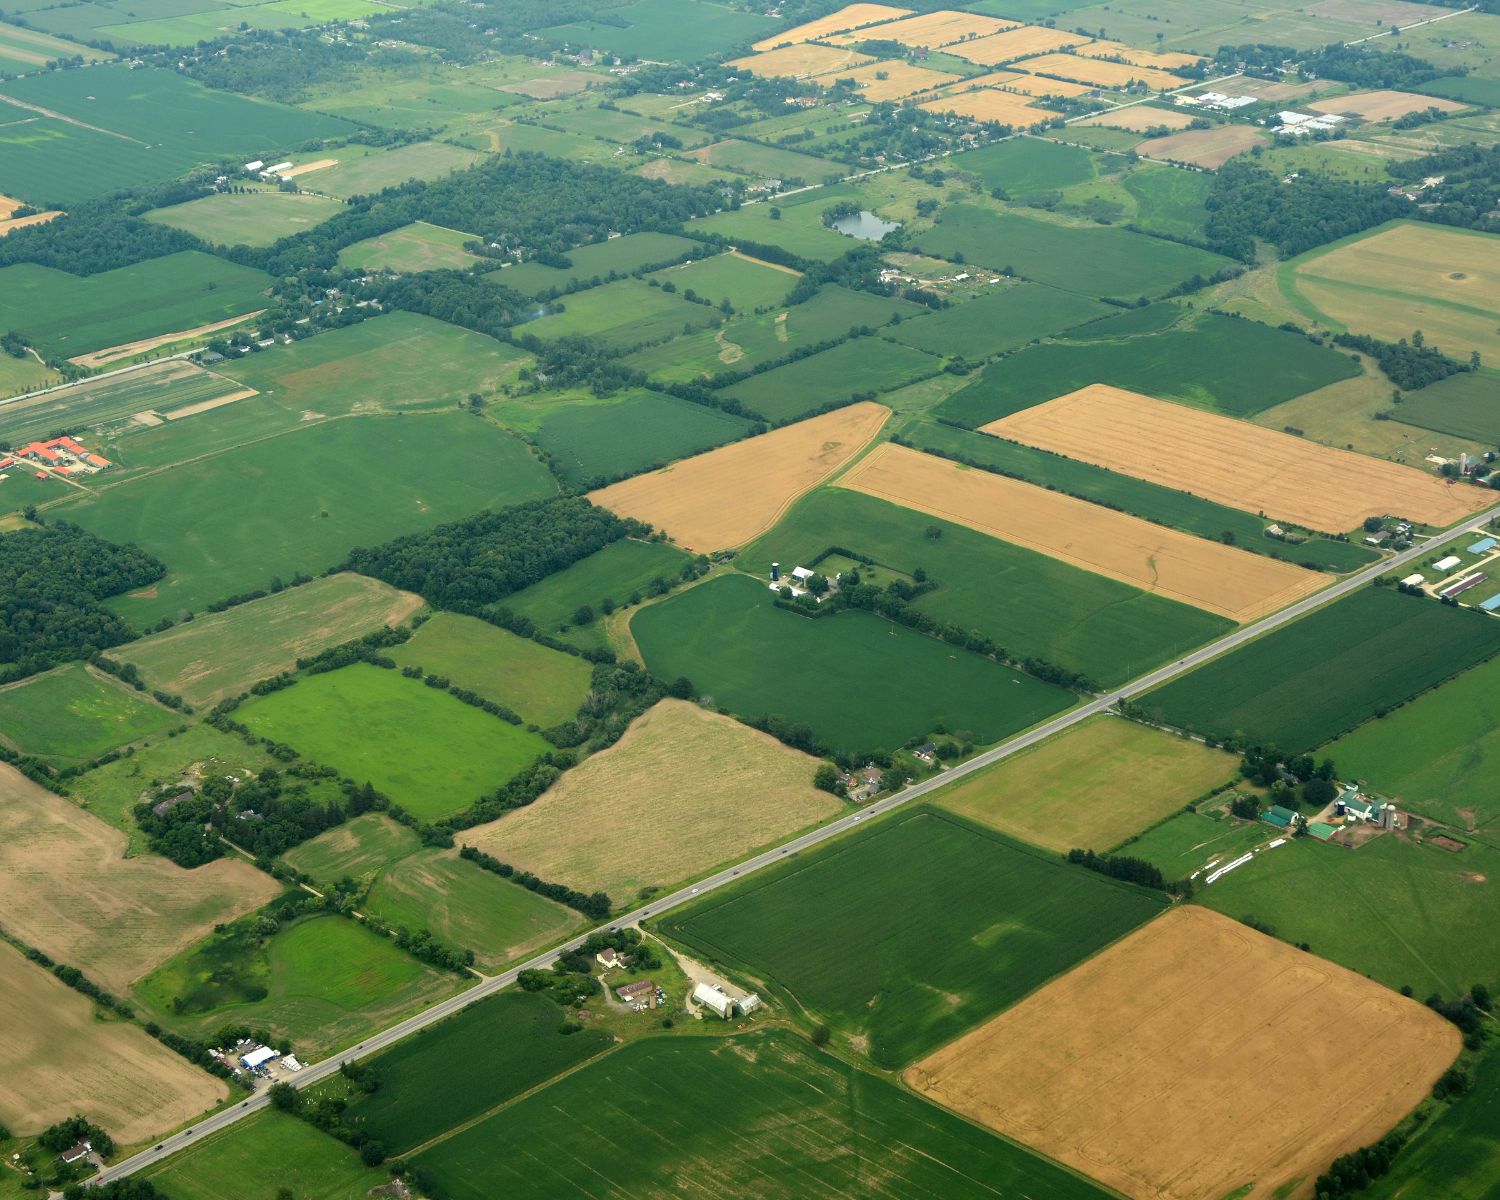 A birdseye view of fields, farms and segments of forest